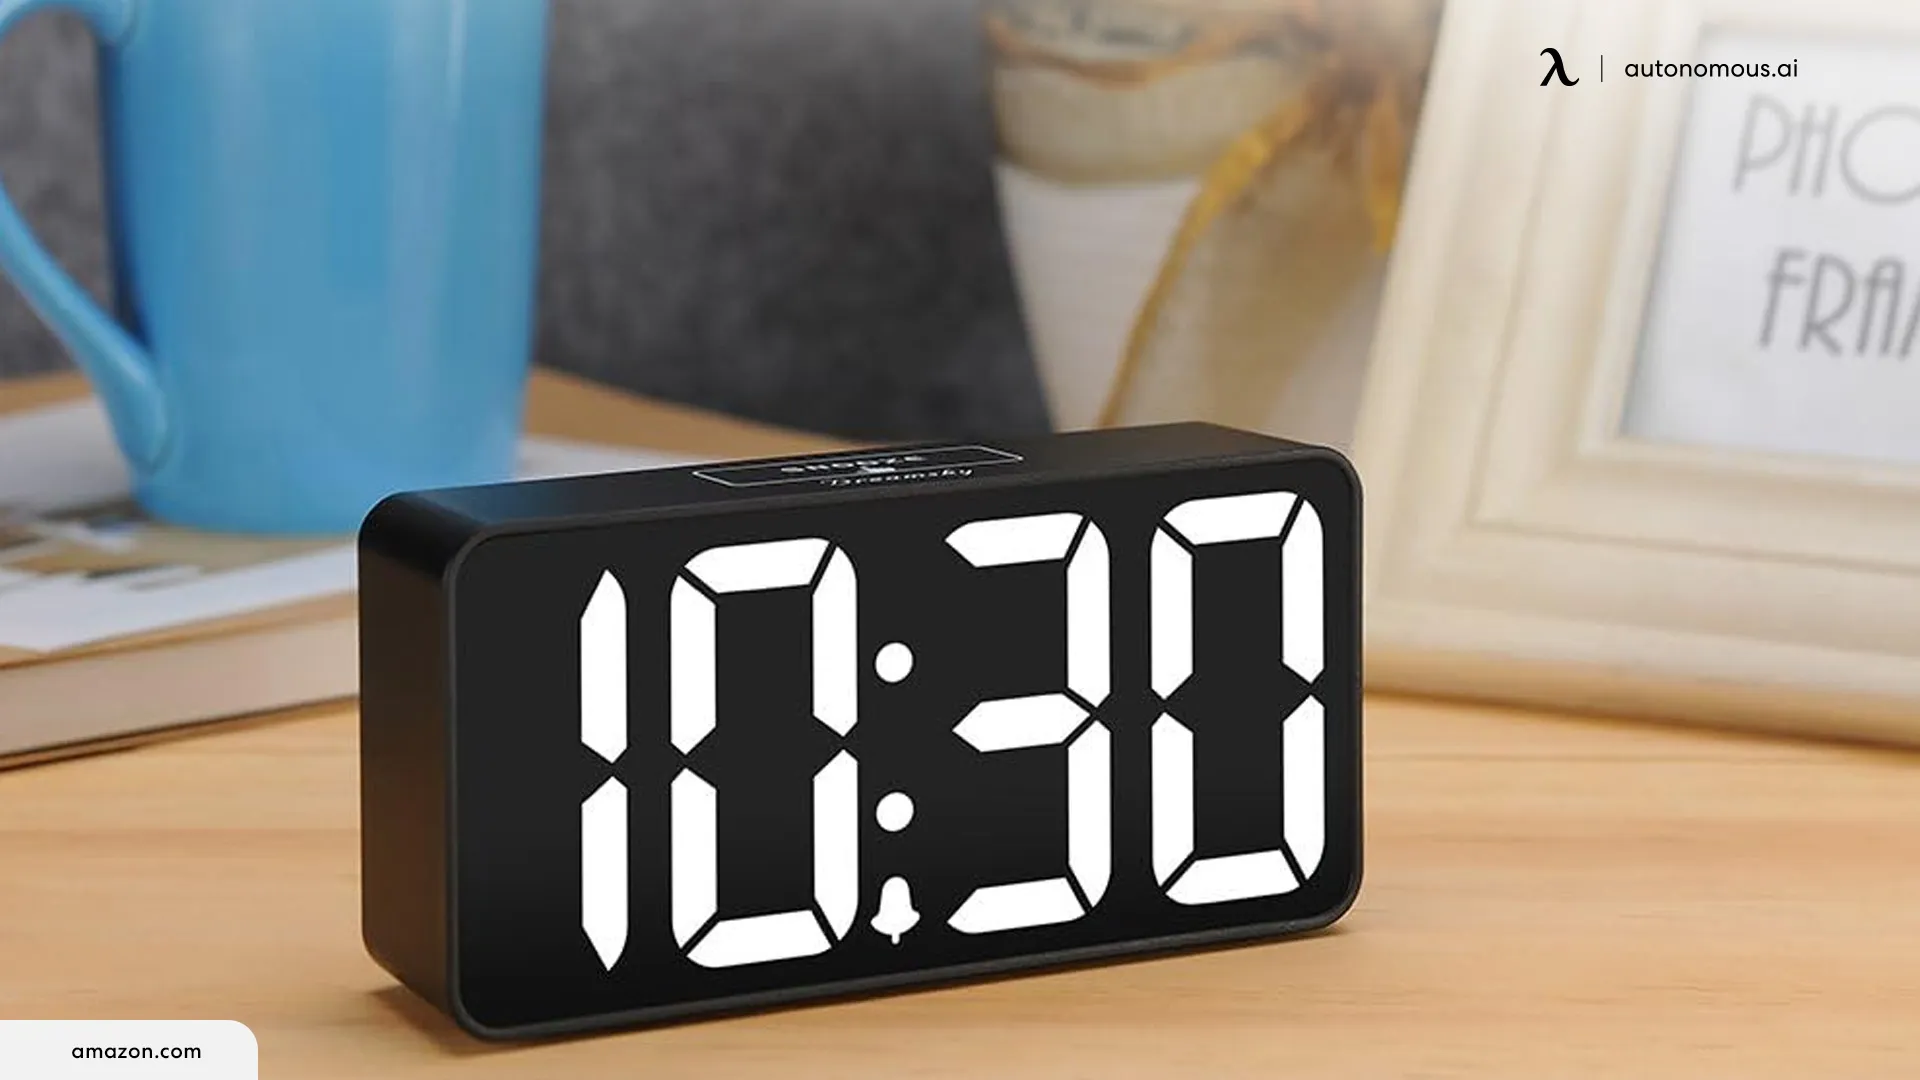 Personalized Desk Clock Ideas for Corporate Gifts